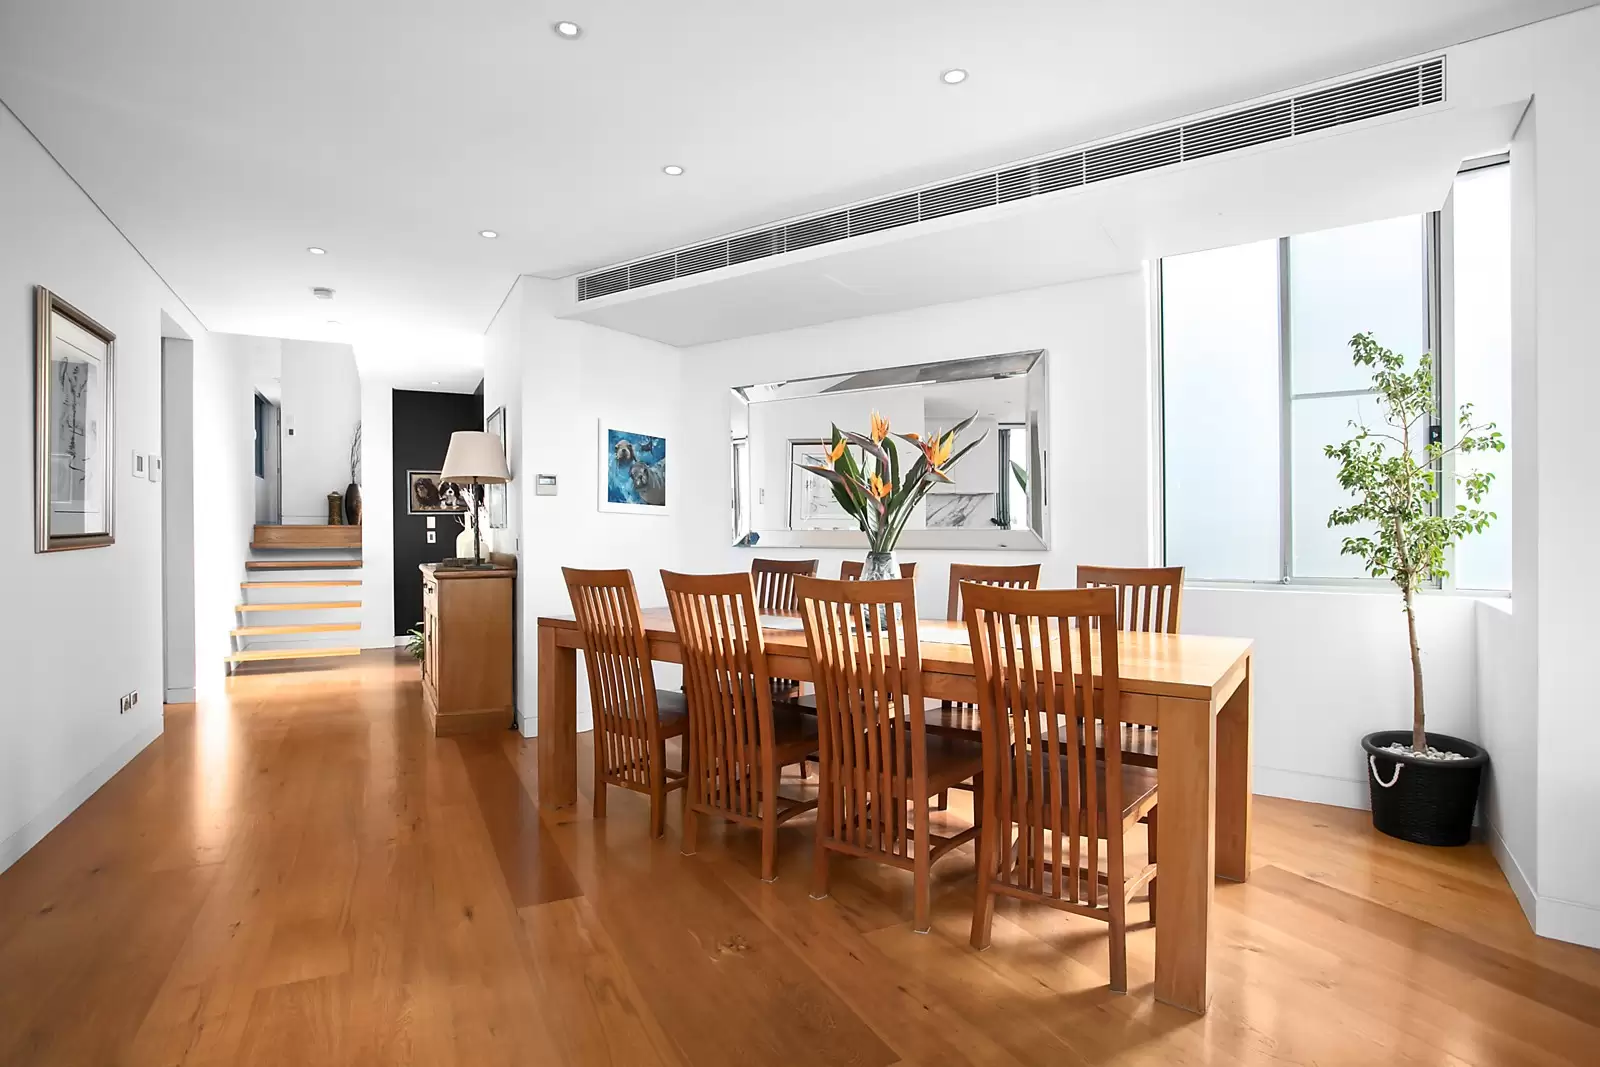 Photo #5: 6/88 Beach Street, Coogee - Sold by Sydney Sotheby's International Realty